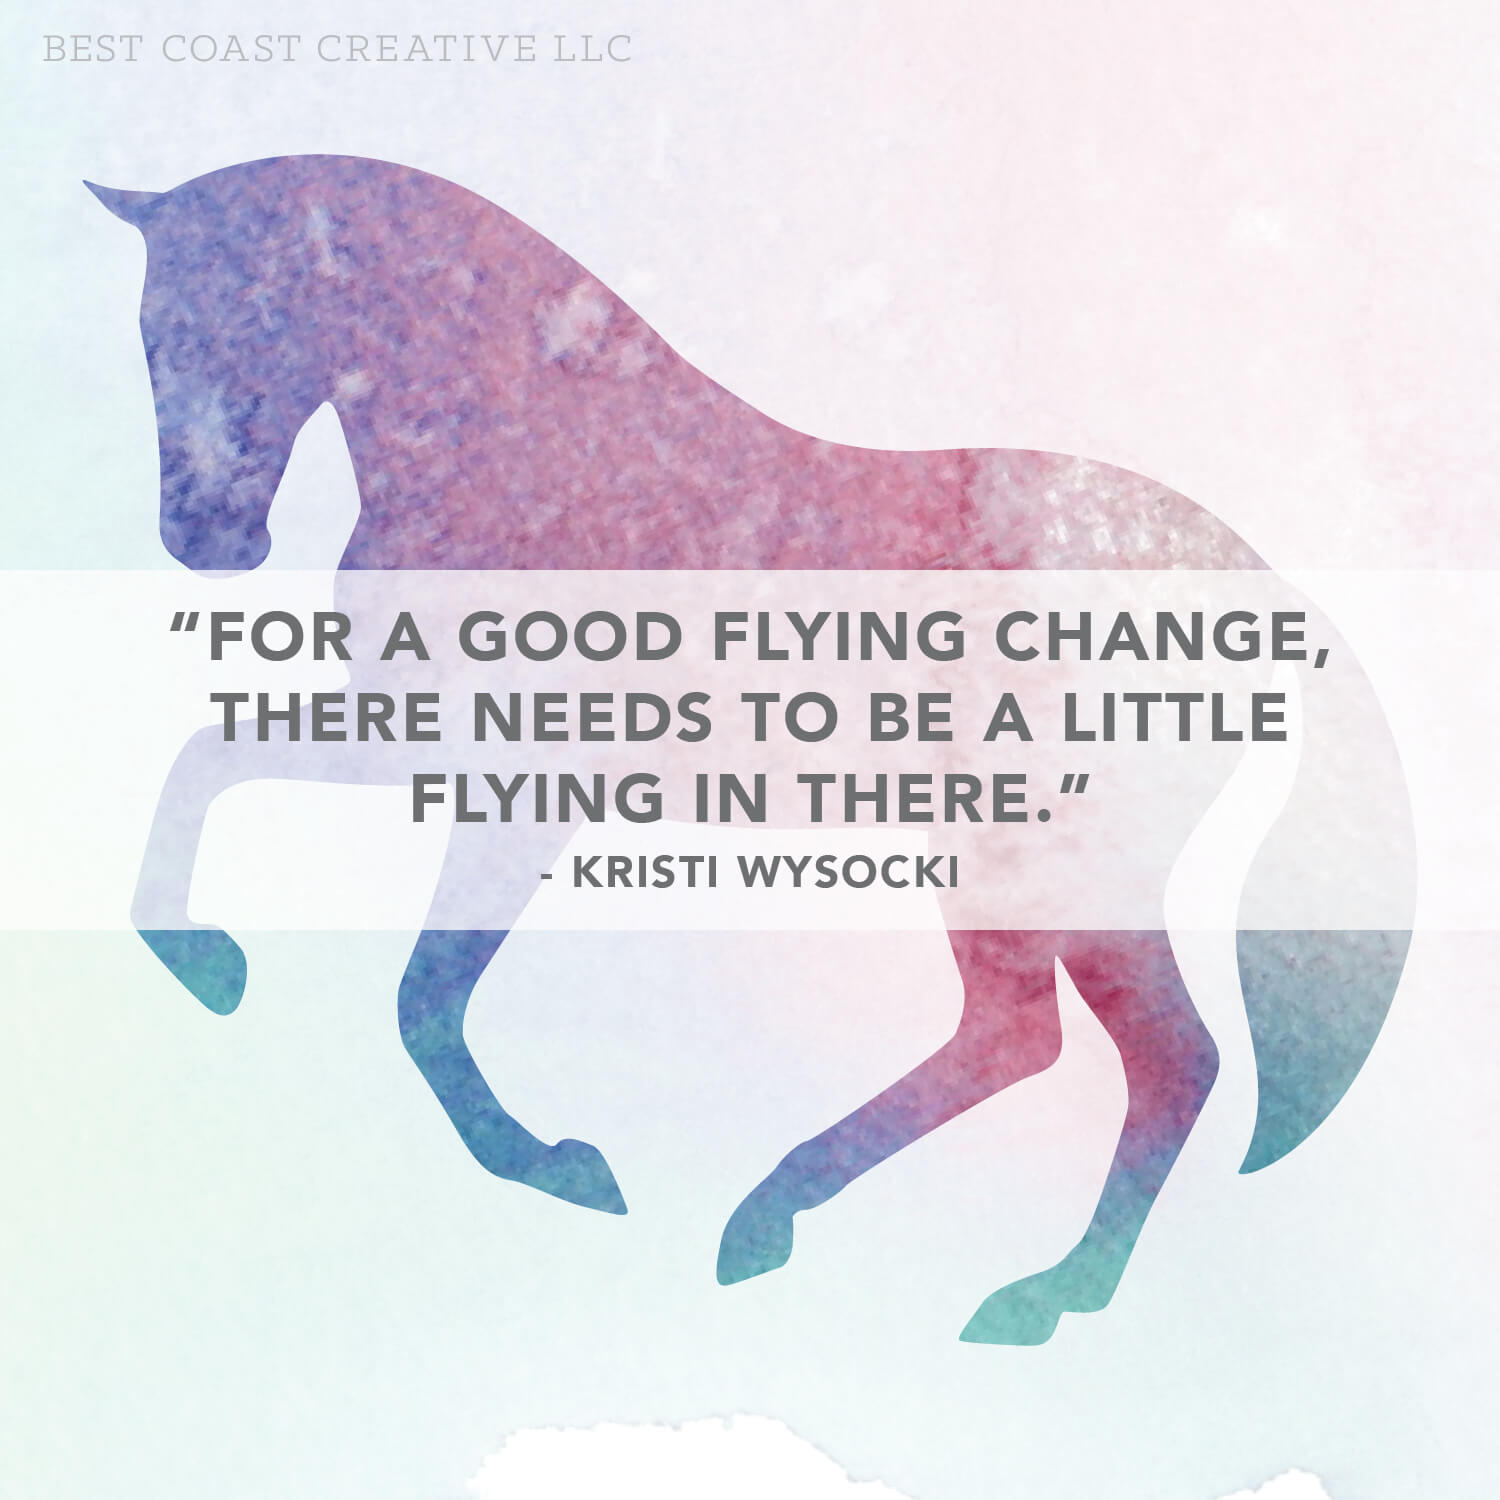 Horse Illustration with Kristi Wysocki clinic quote “For a good flying change, there needs to be a little flying in there.”